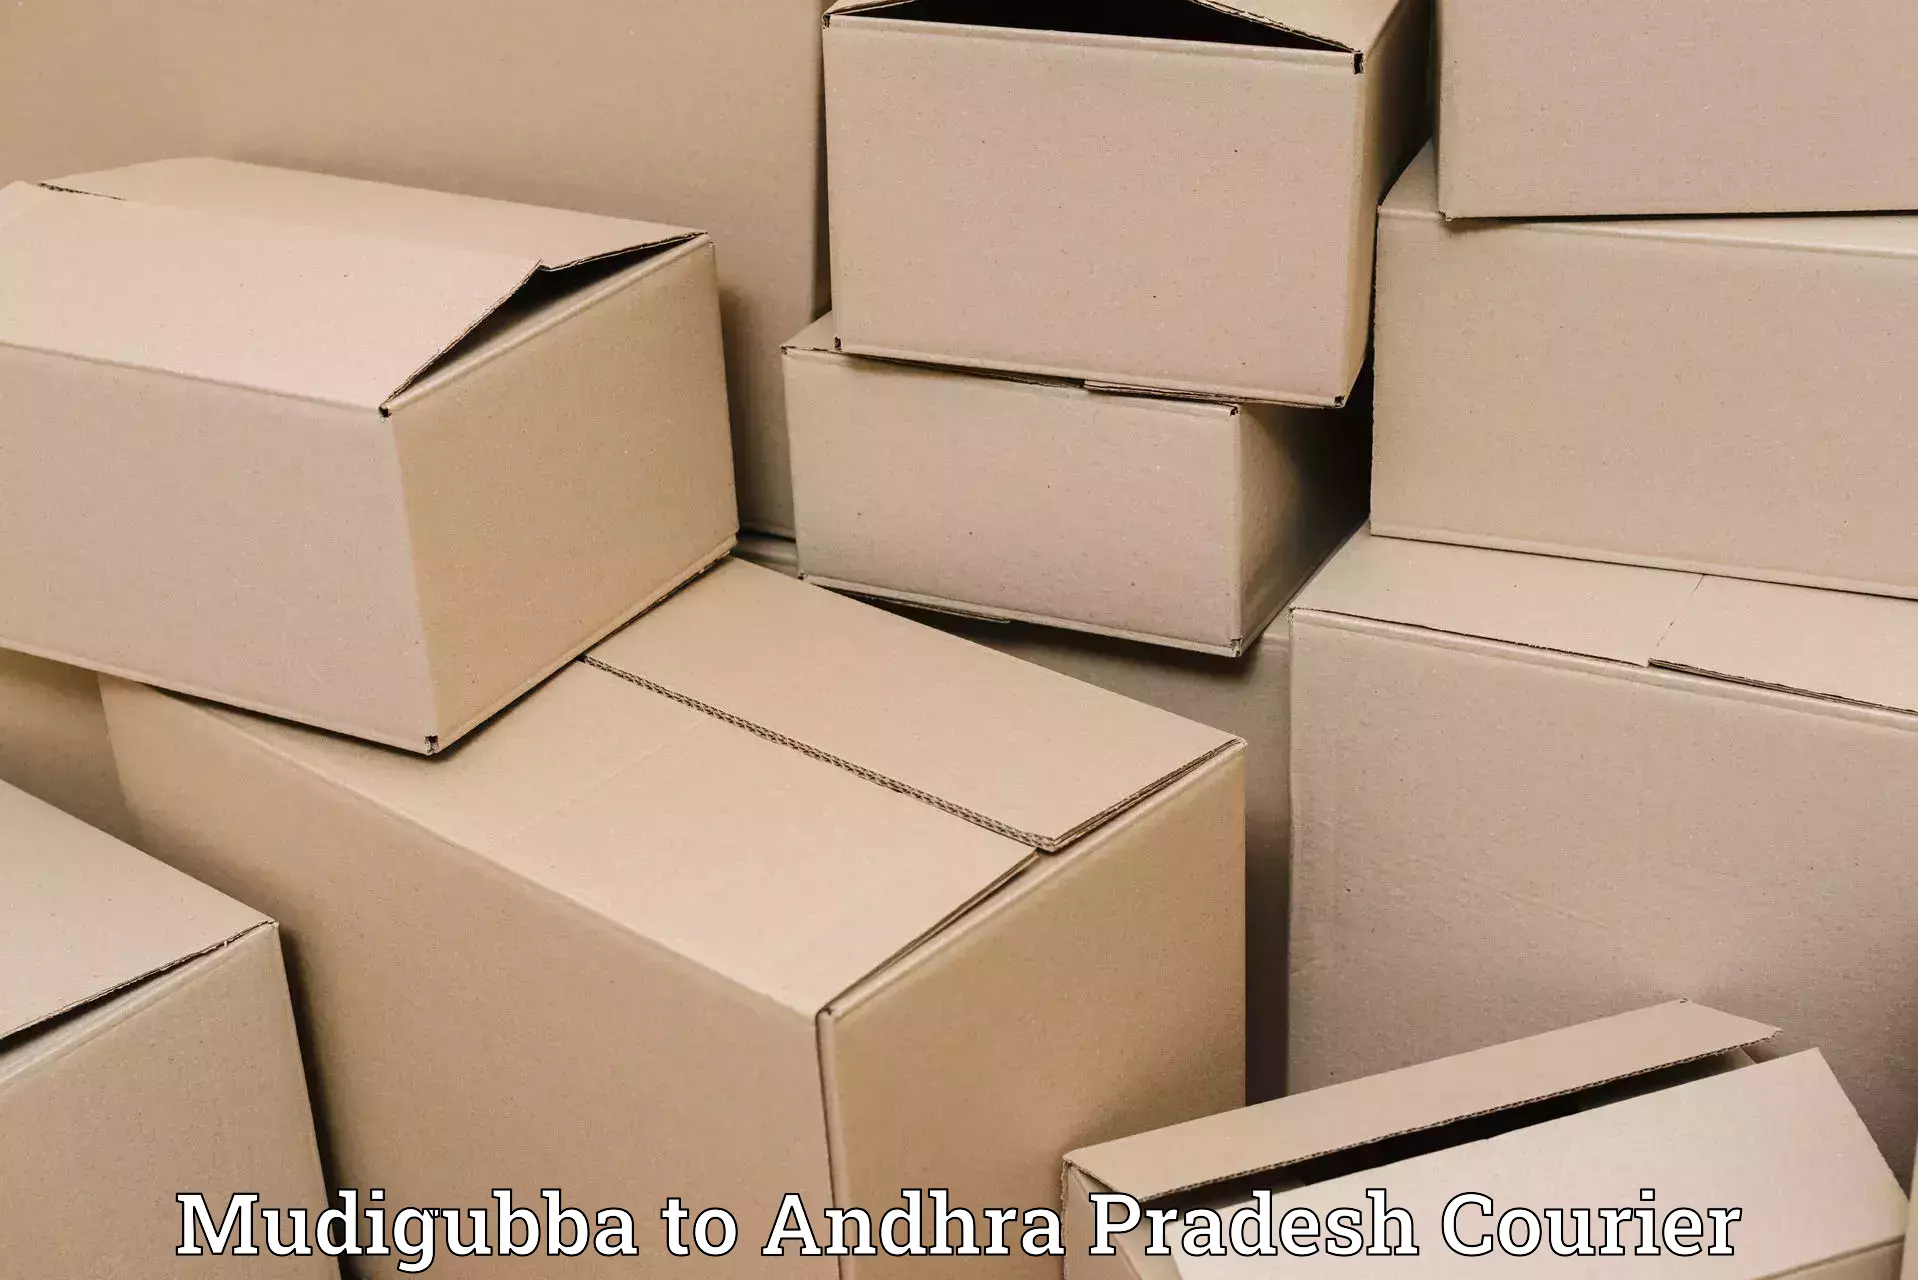 Same-day delivery solutions Mudigubba to Visakhapatnam Port